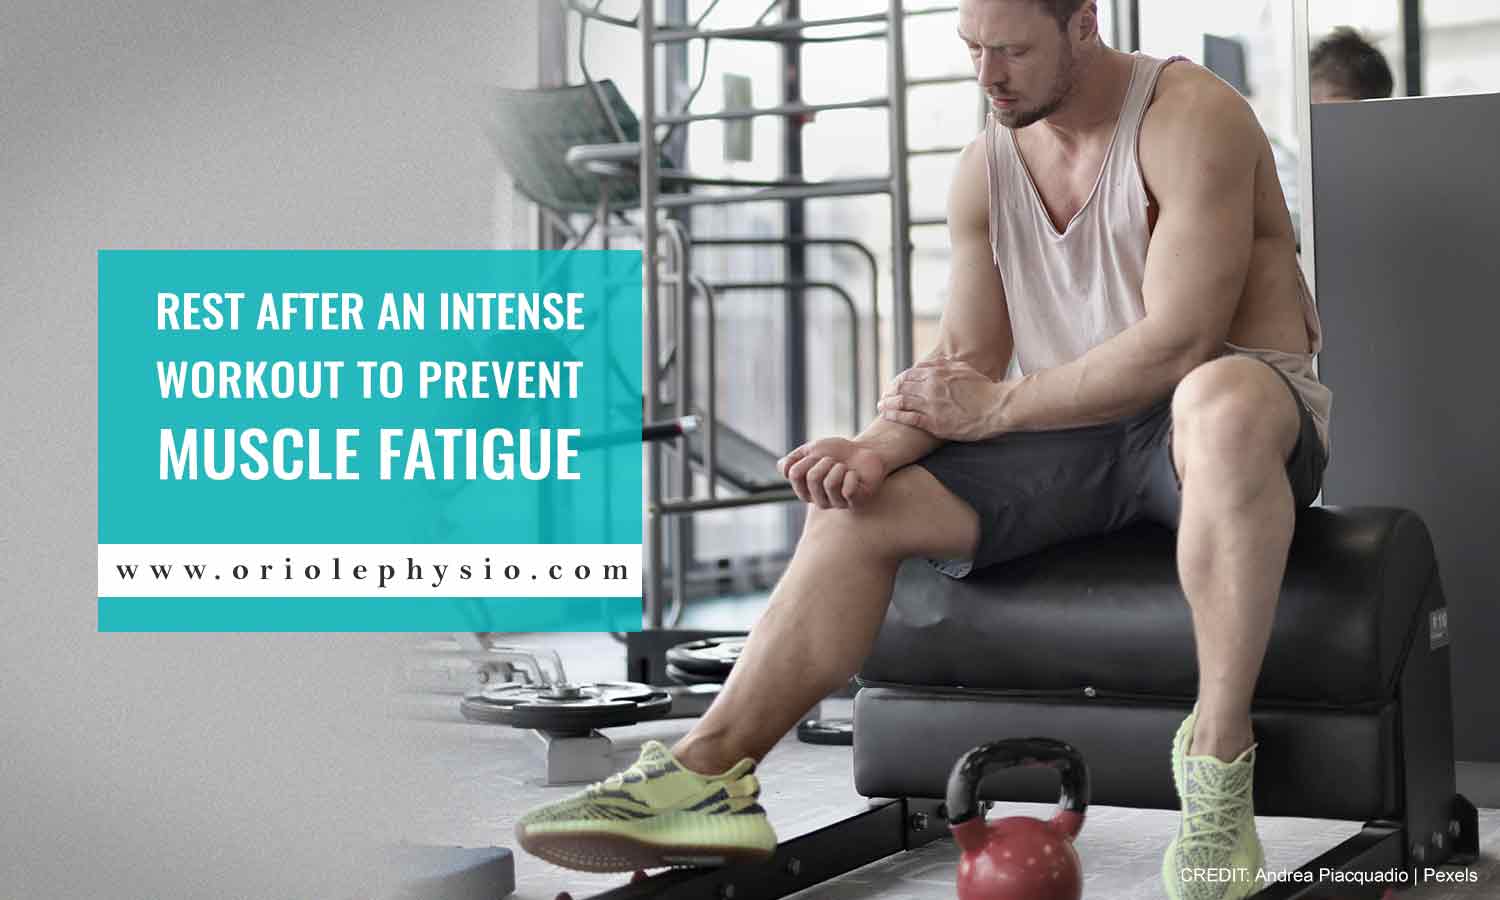 Rest after an intense workout to prevent muscle fatigue